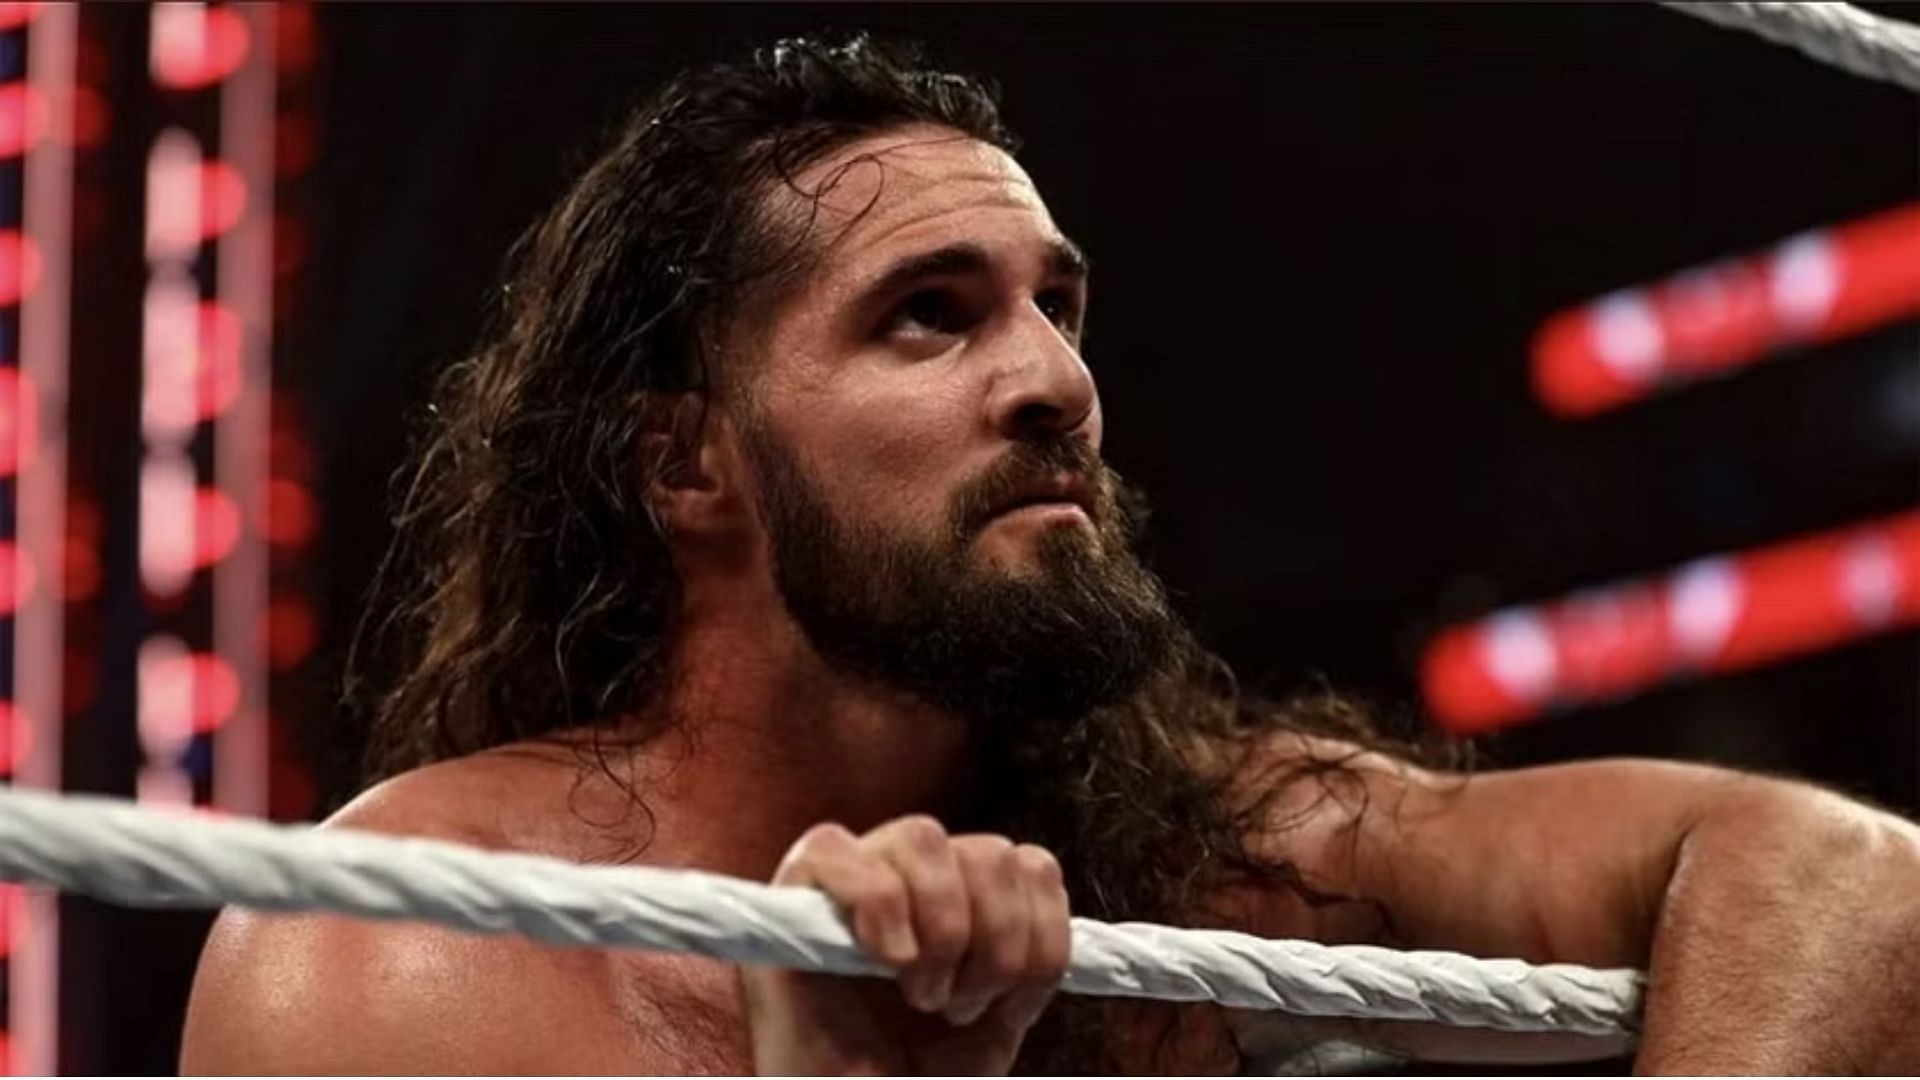 Seth Rollins is one of the top stars of WWE